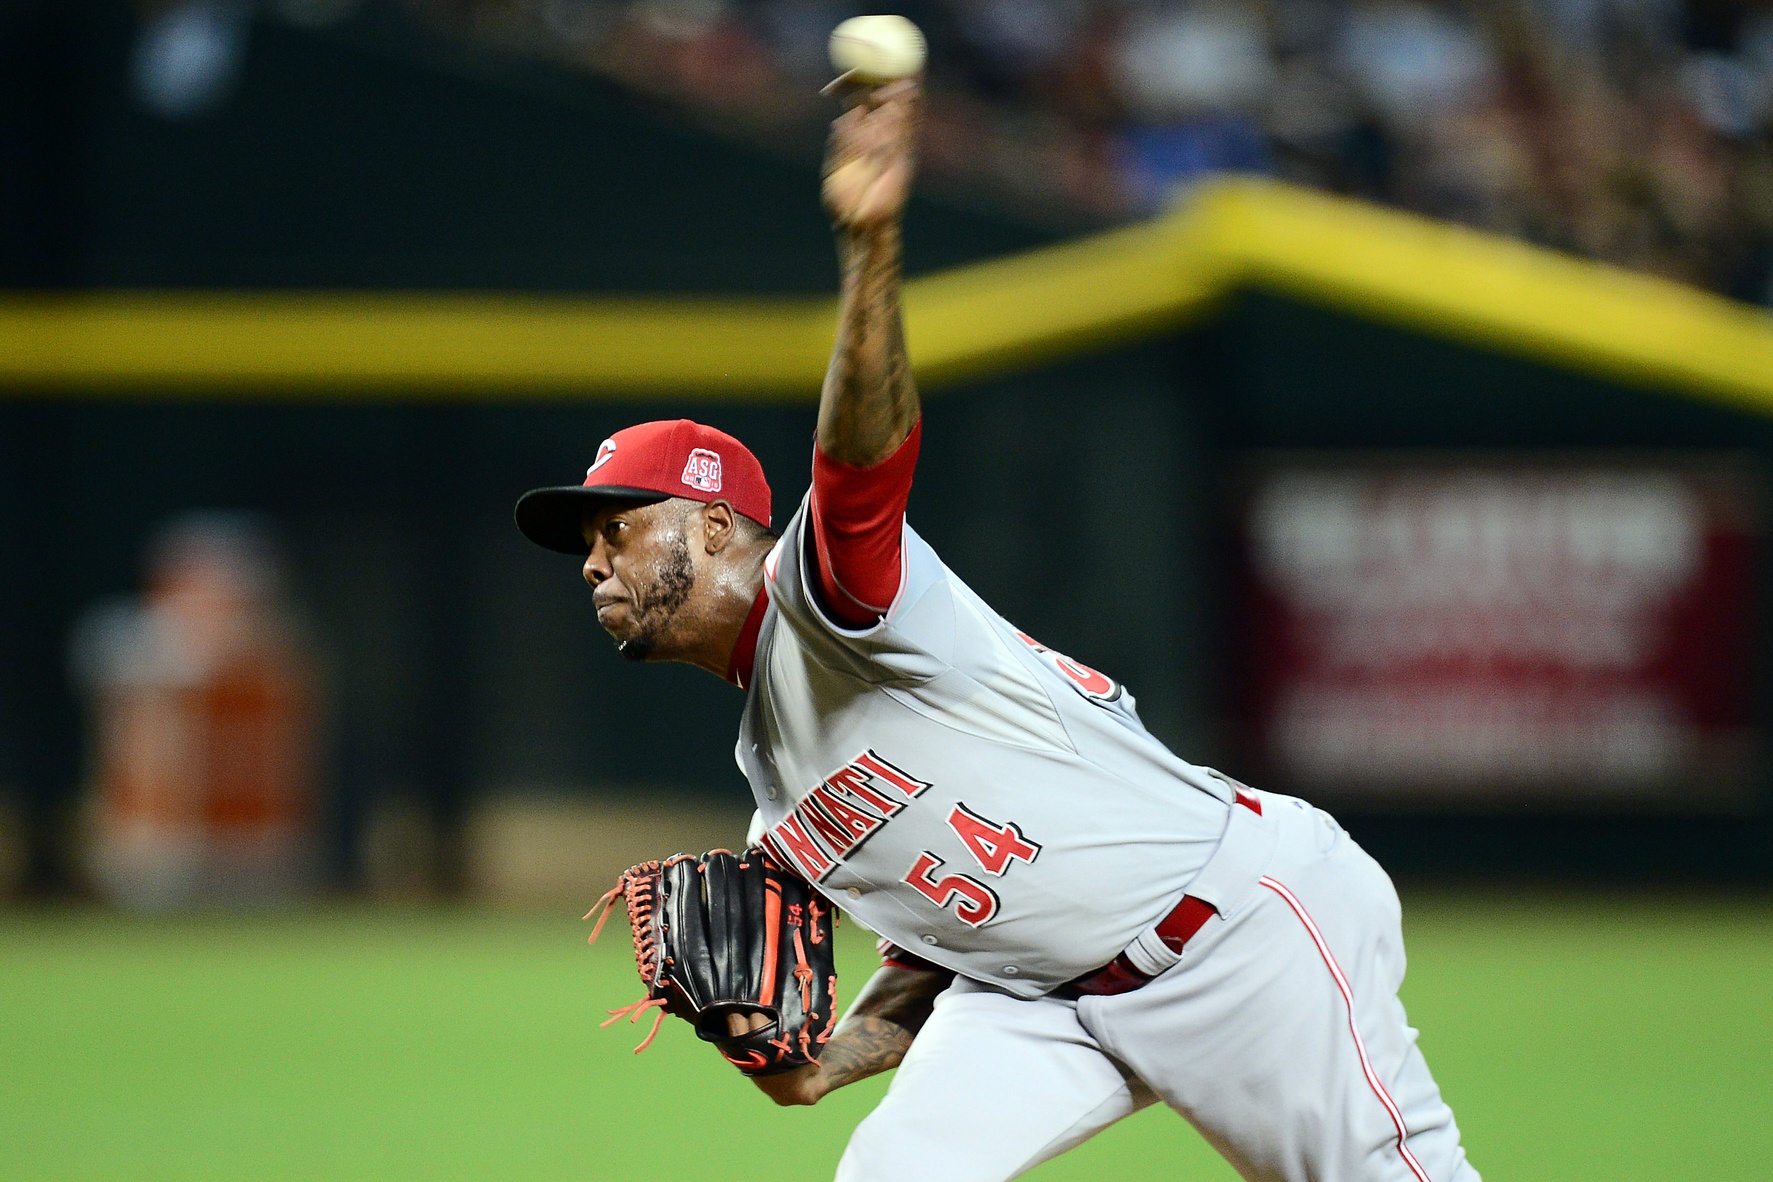 Here's the holy hell an Aroldis Chapman fastball does to your body